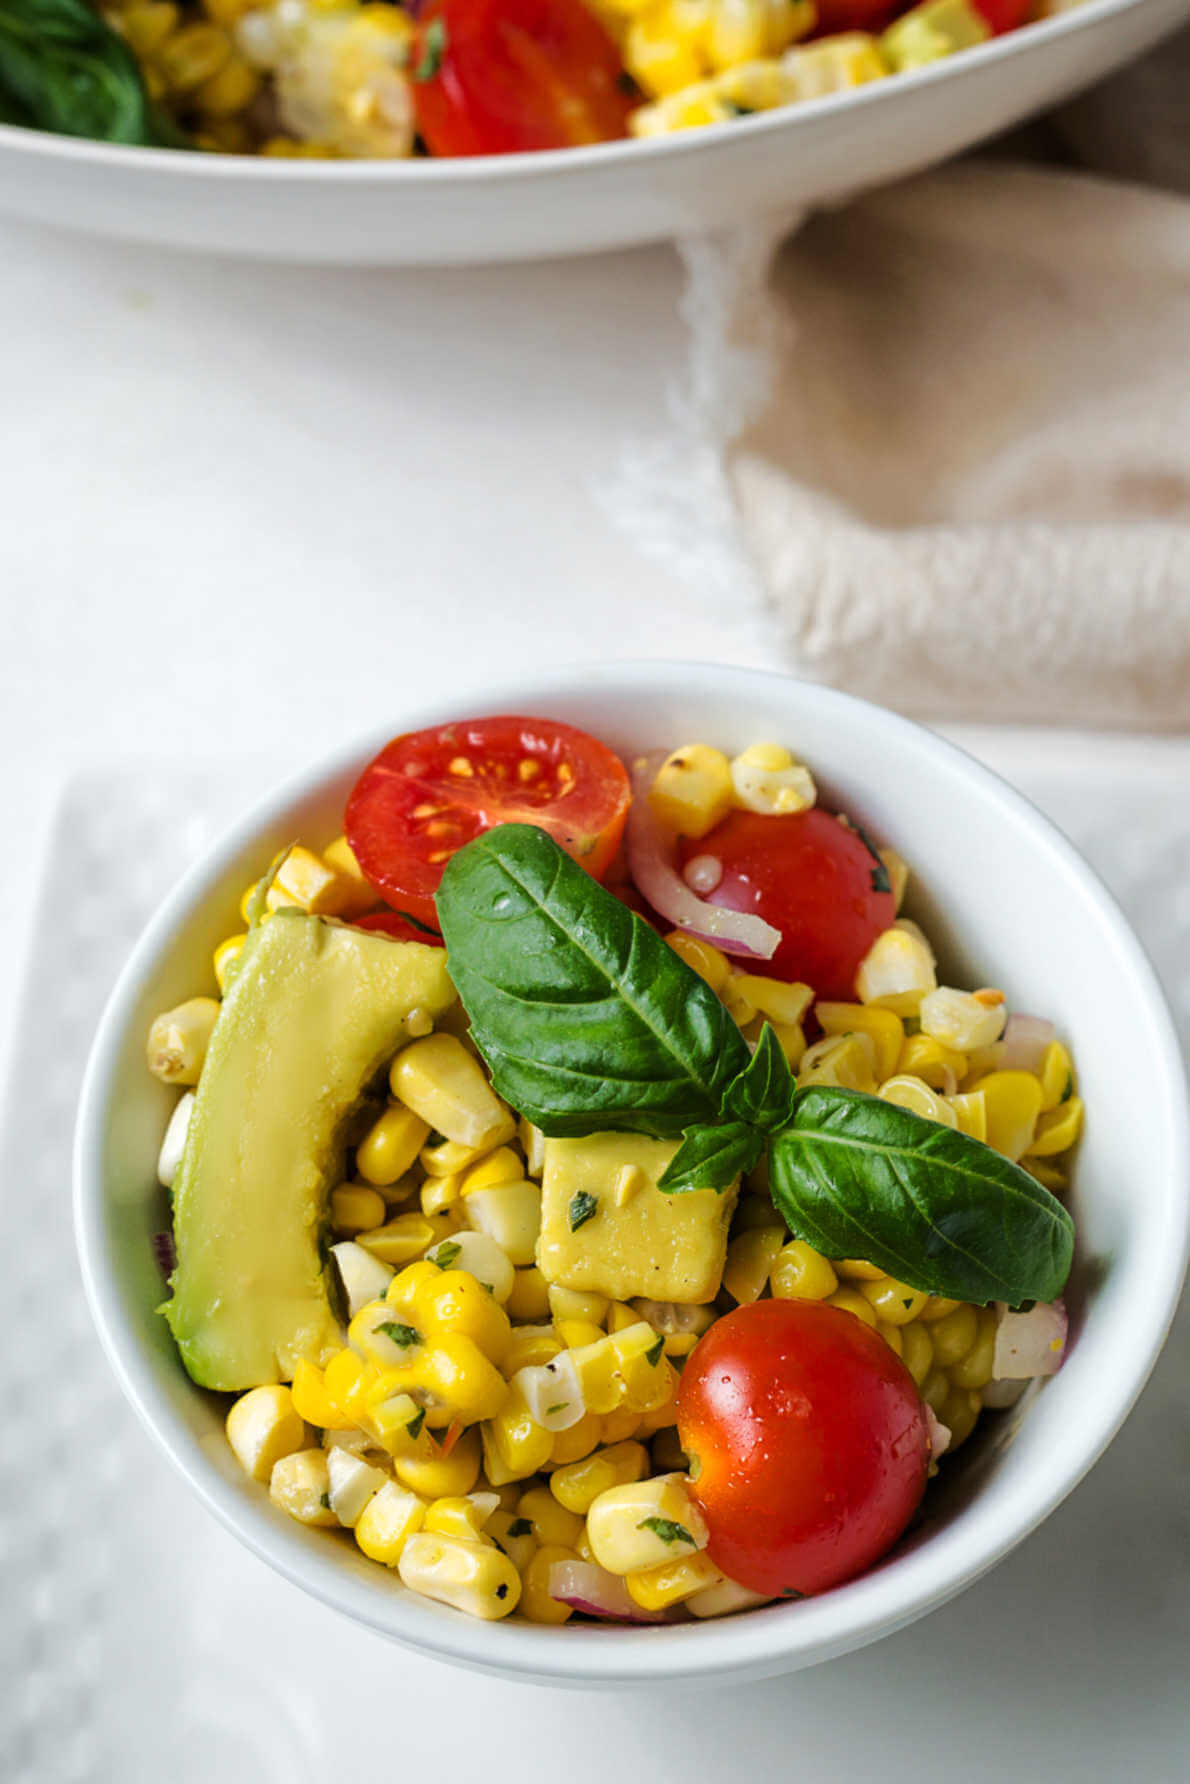 a serving of corn and avocado salad in a bowl on a table.